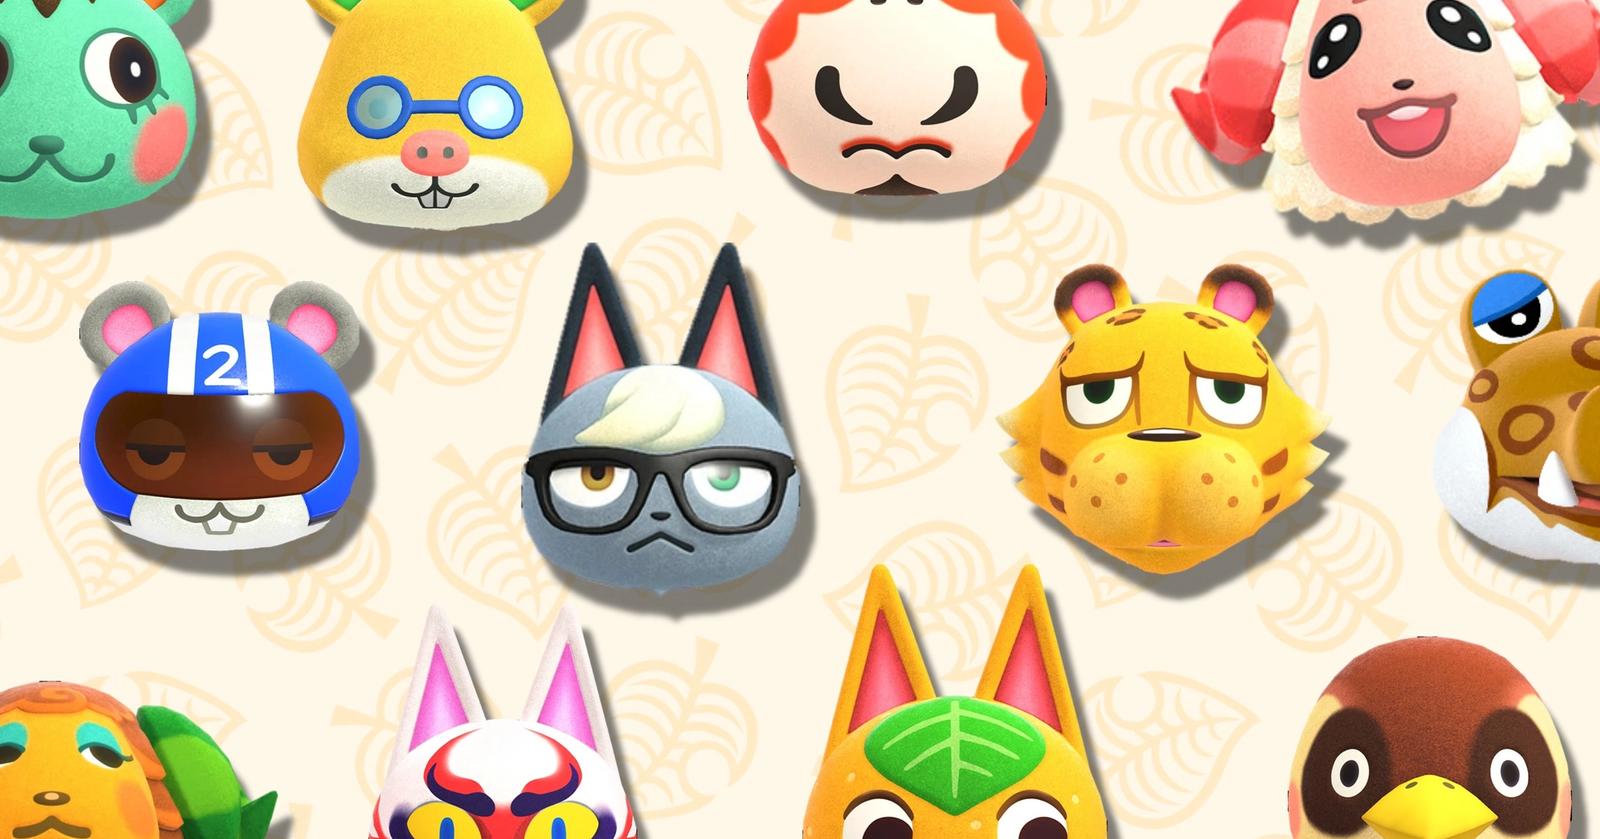 Animal Crossing: New Horizons: Villager List - Personalities And